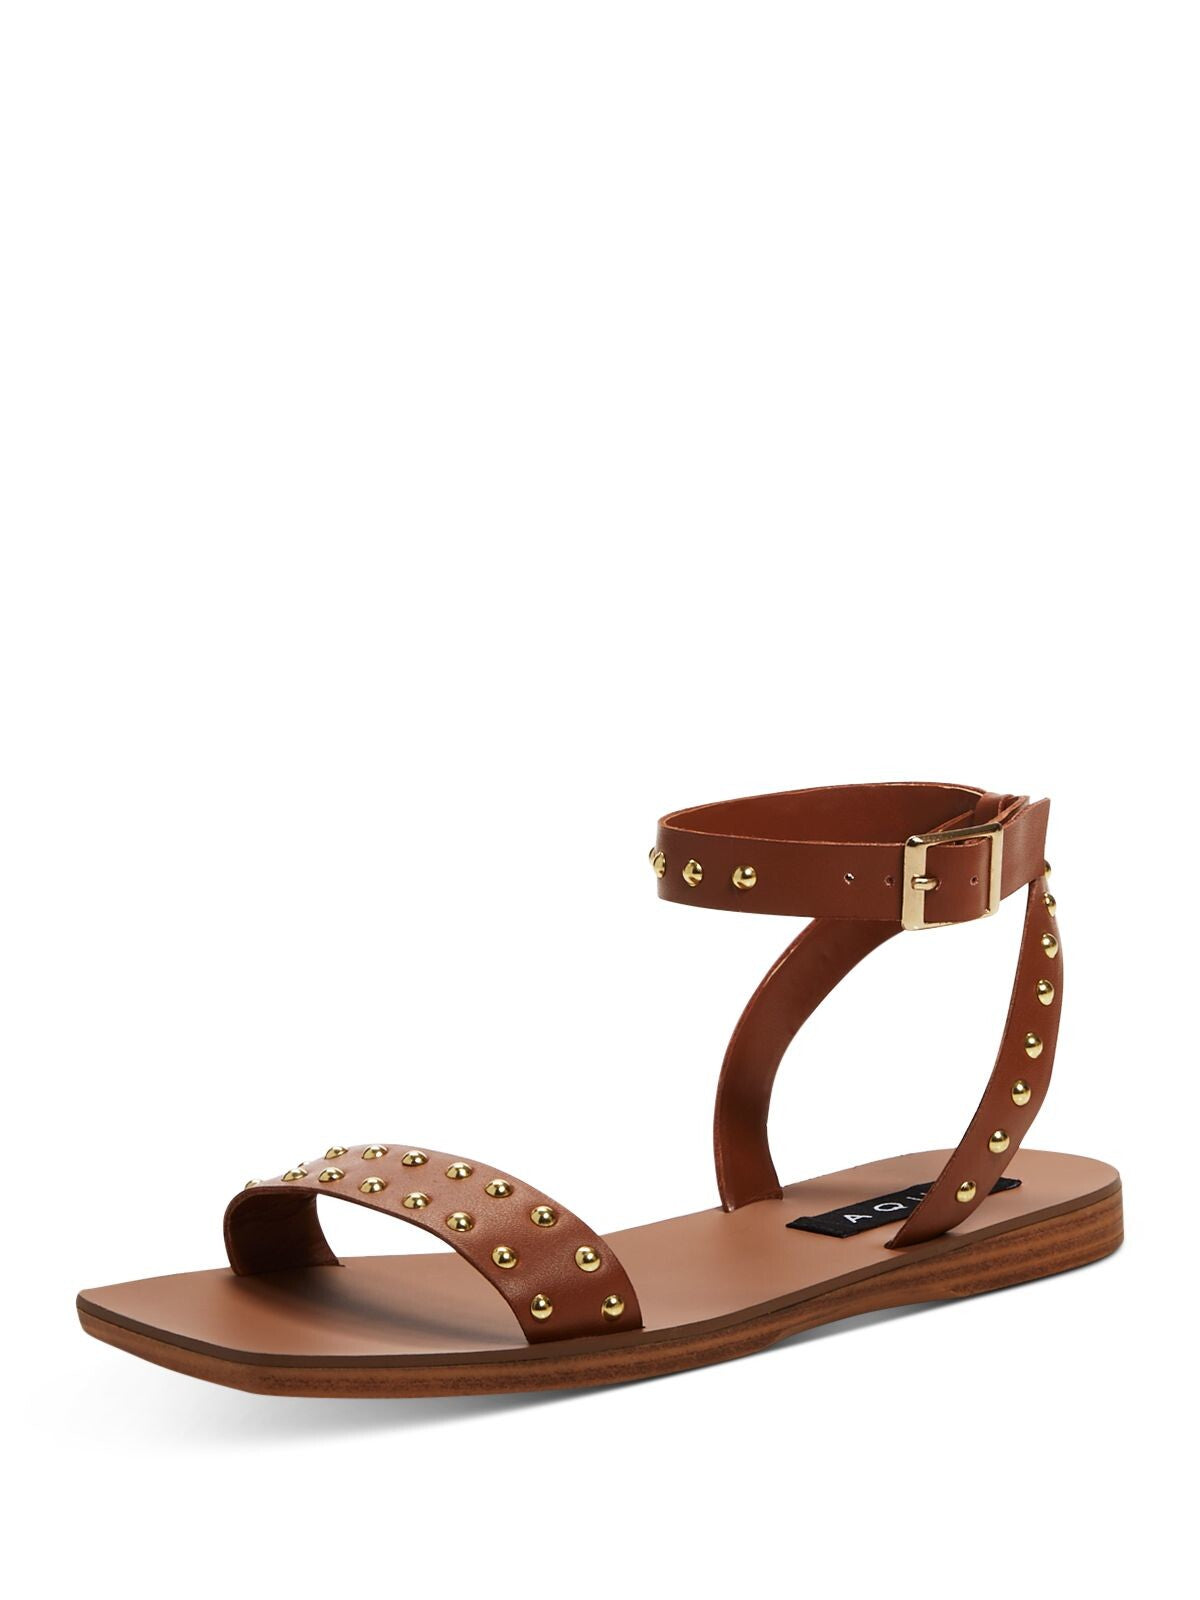 AQUA Womens Brown Adjustable Studded Ankle Strap Sophy Square Toe Wedge Buckle Leather Gladiator Sandals Shoes 7.5 M